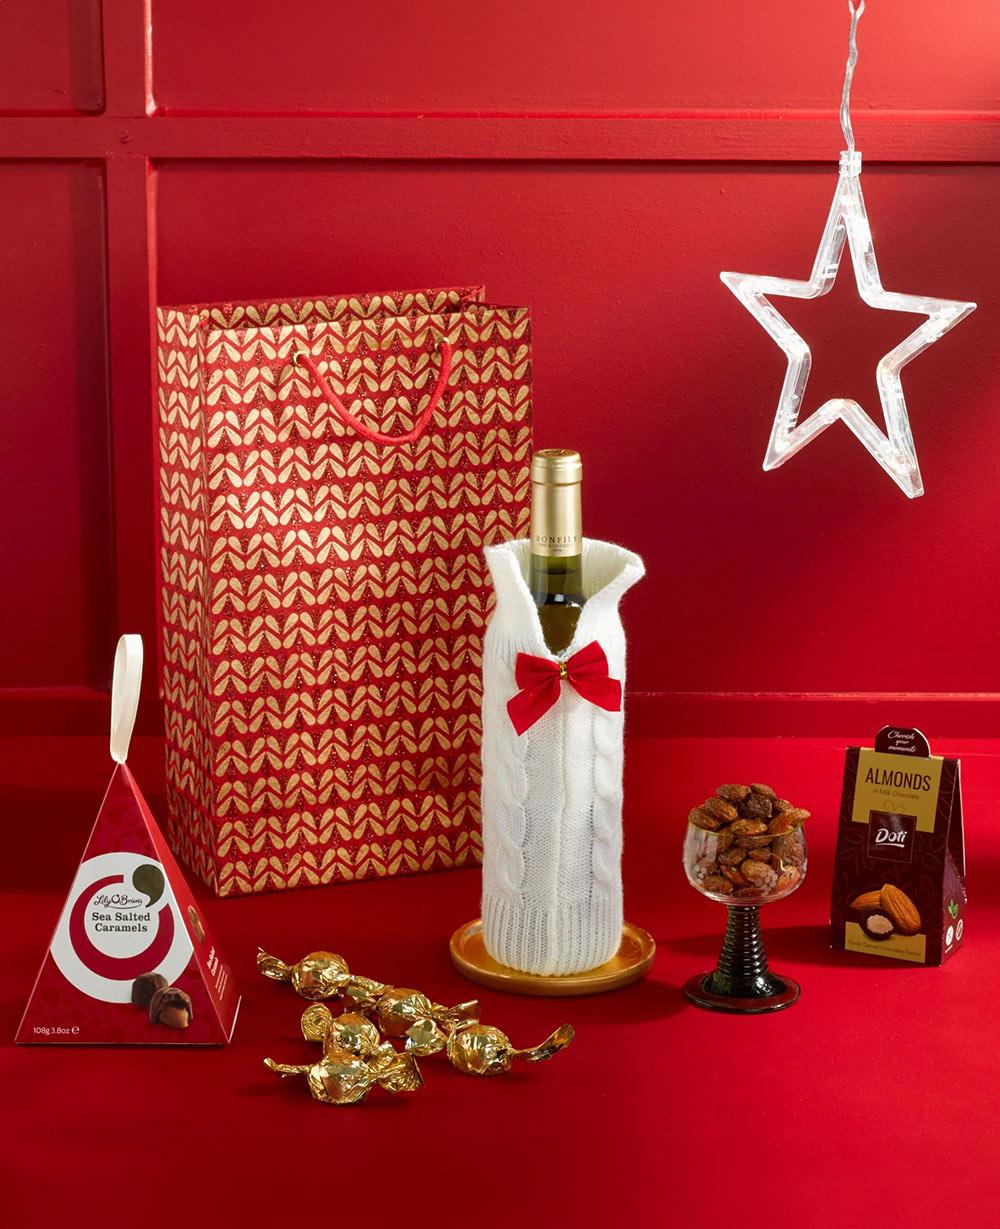 Festive Thanks with White Wine Gift Bag